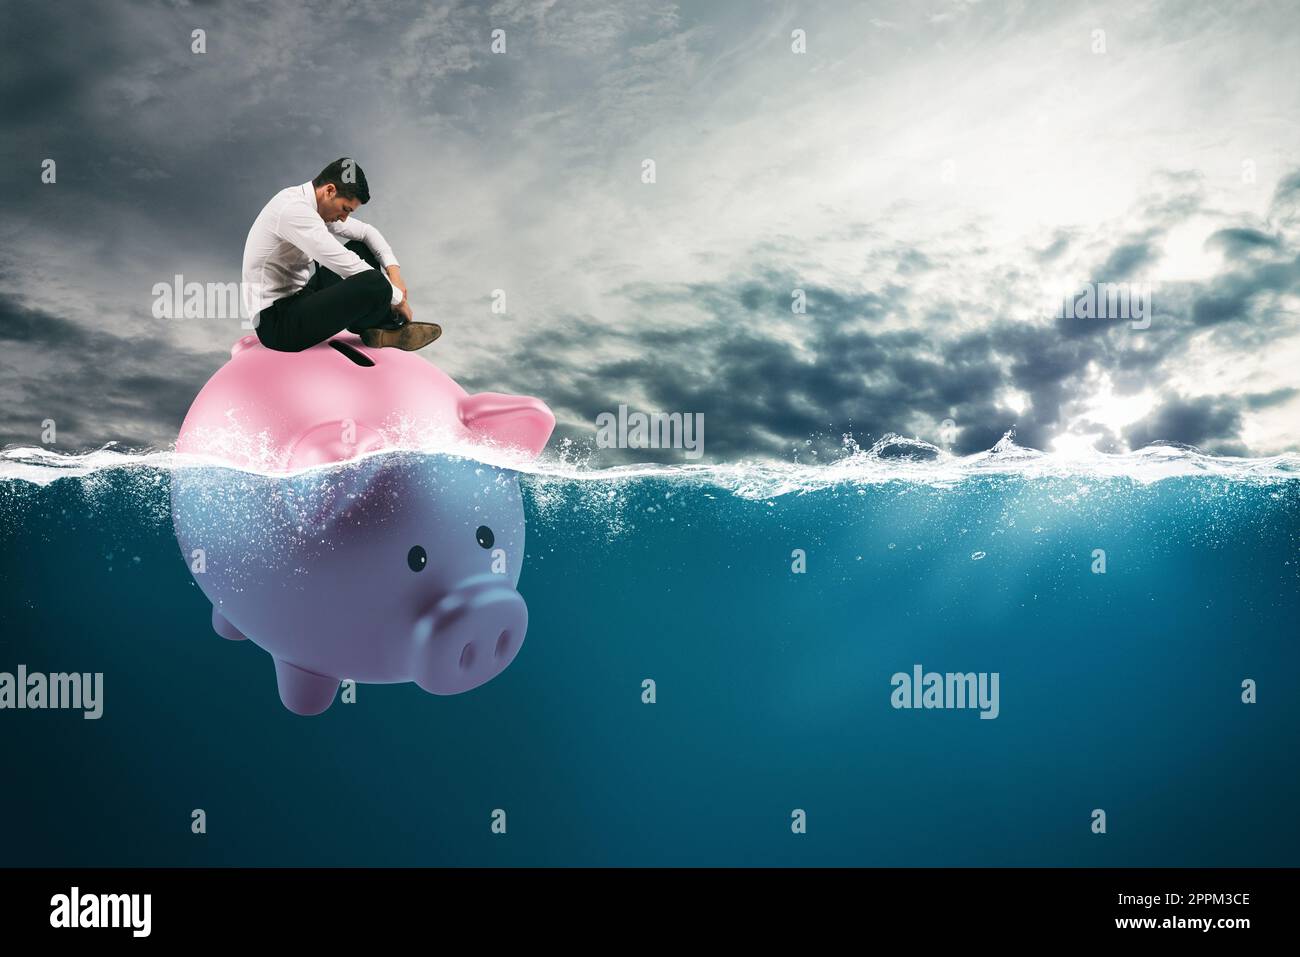 Business man in financial trouble sails on piggy bank in bad waters due to the crisis Stock Photo